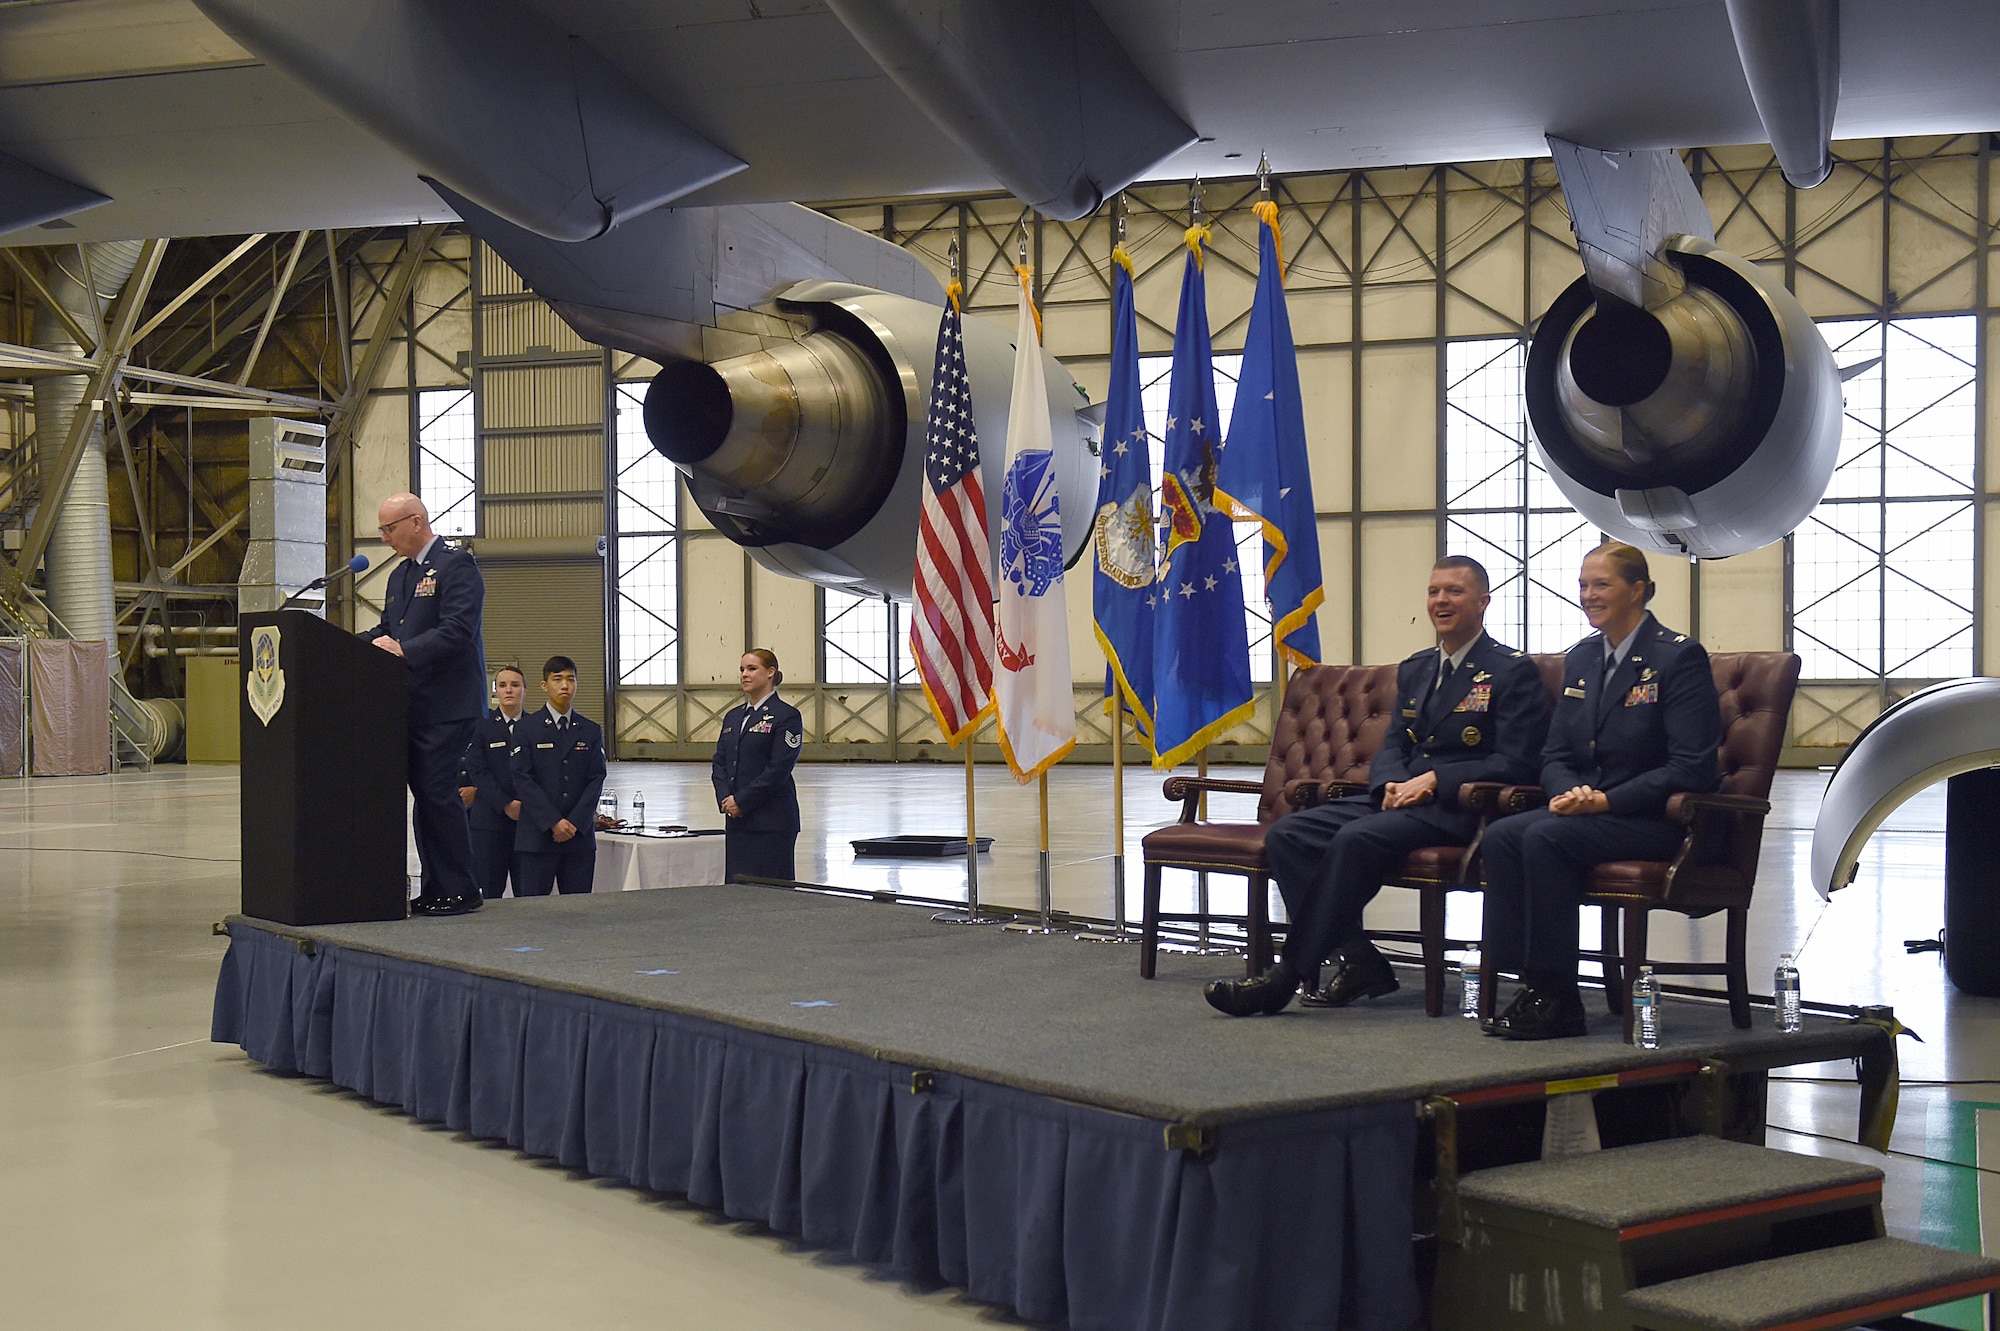 Maj. Gen. Sam Barrett, 18th Air Force commander, left, speaks at the 62nd Airlift Wing change of command on Joint Base Lewis-McChord, Wash., Jan. 10, 2020.